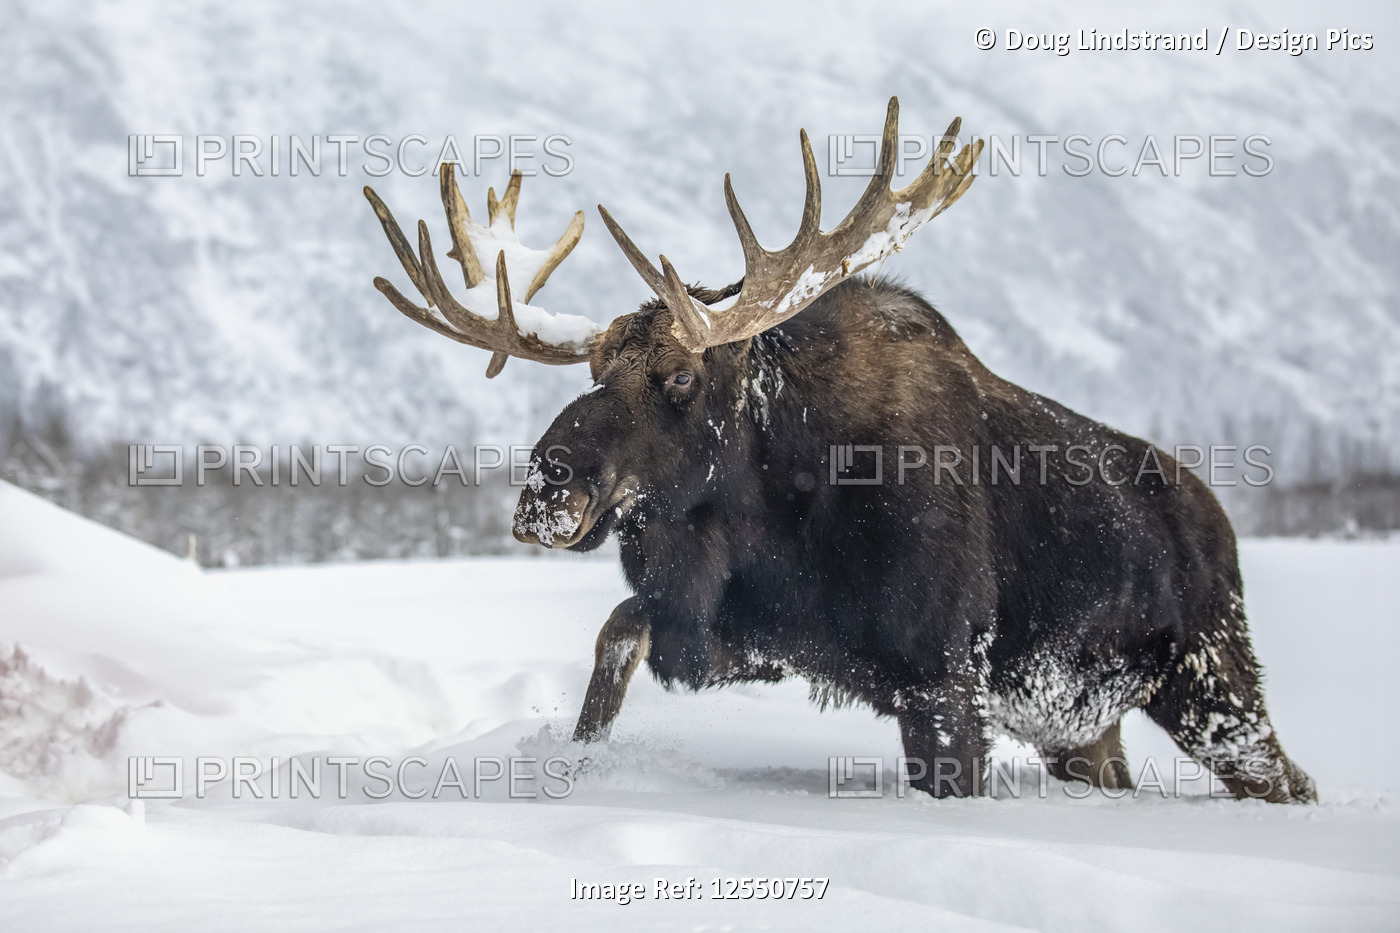 Mature bull moose (Alces alces) with antlers shed of velvet walking in snow, ...